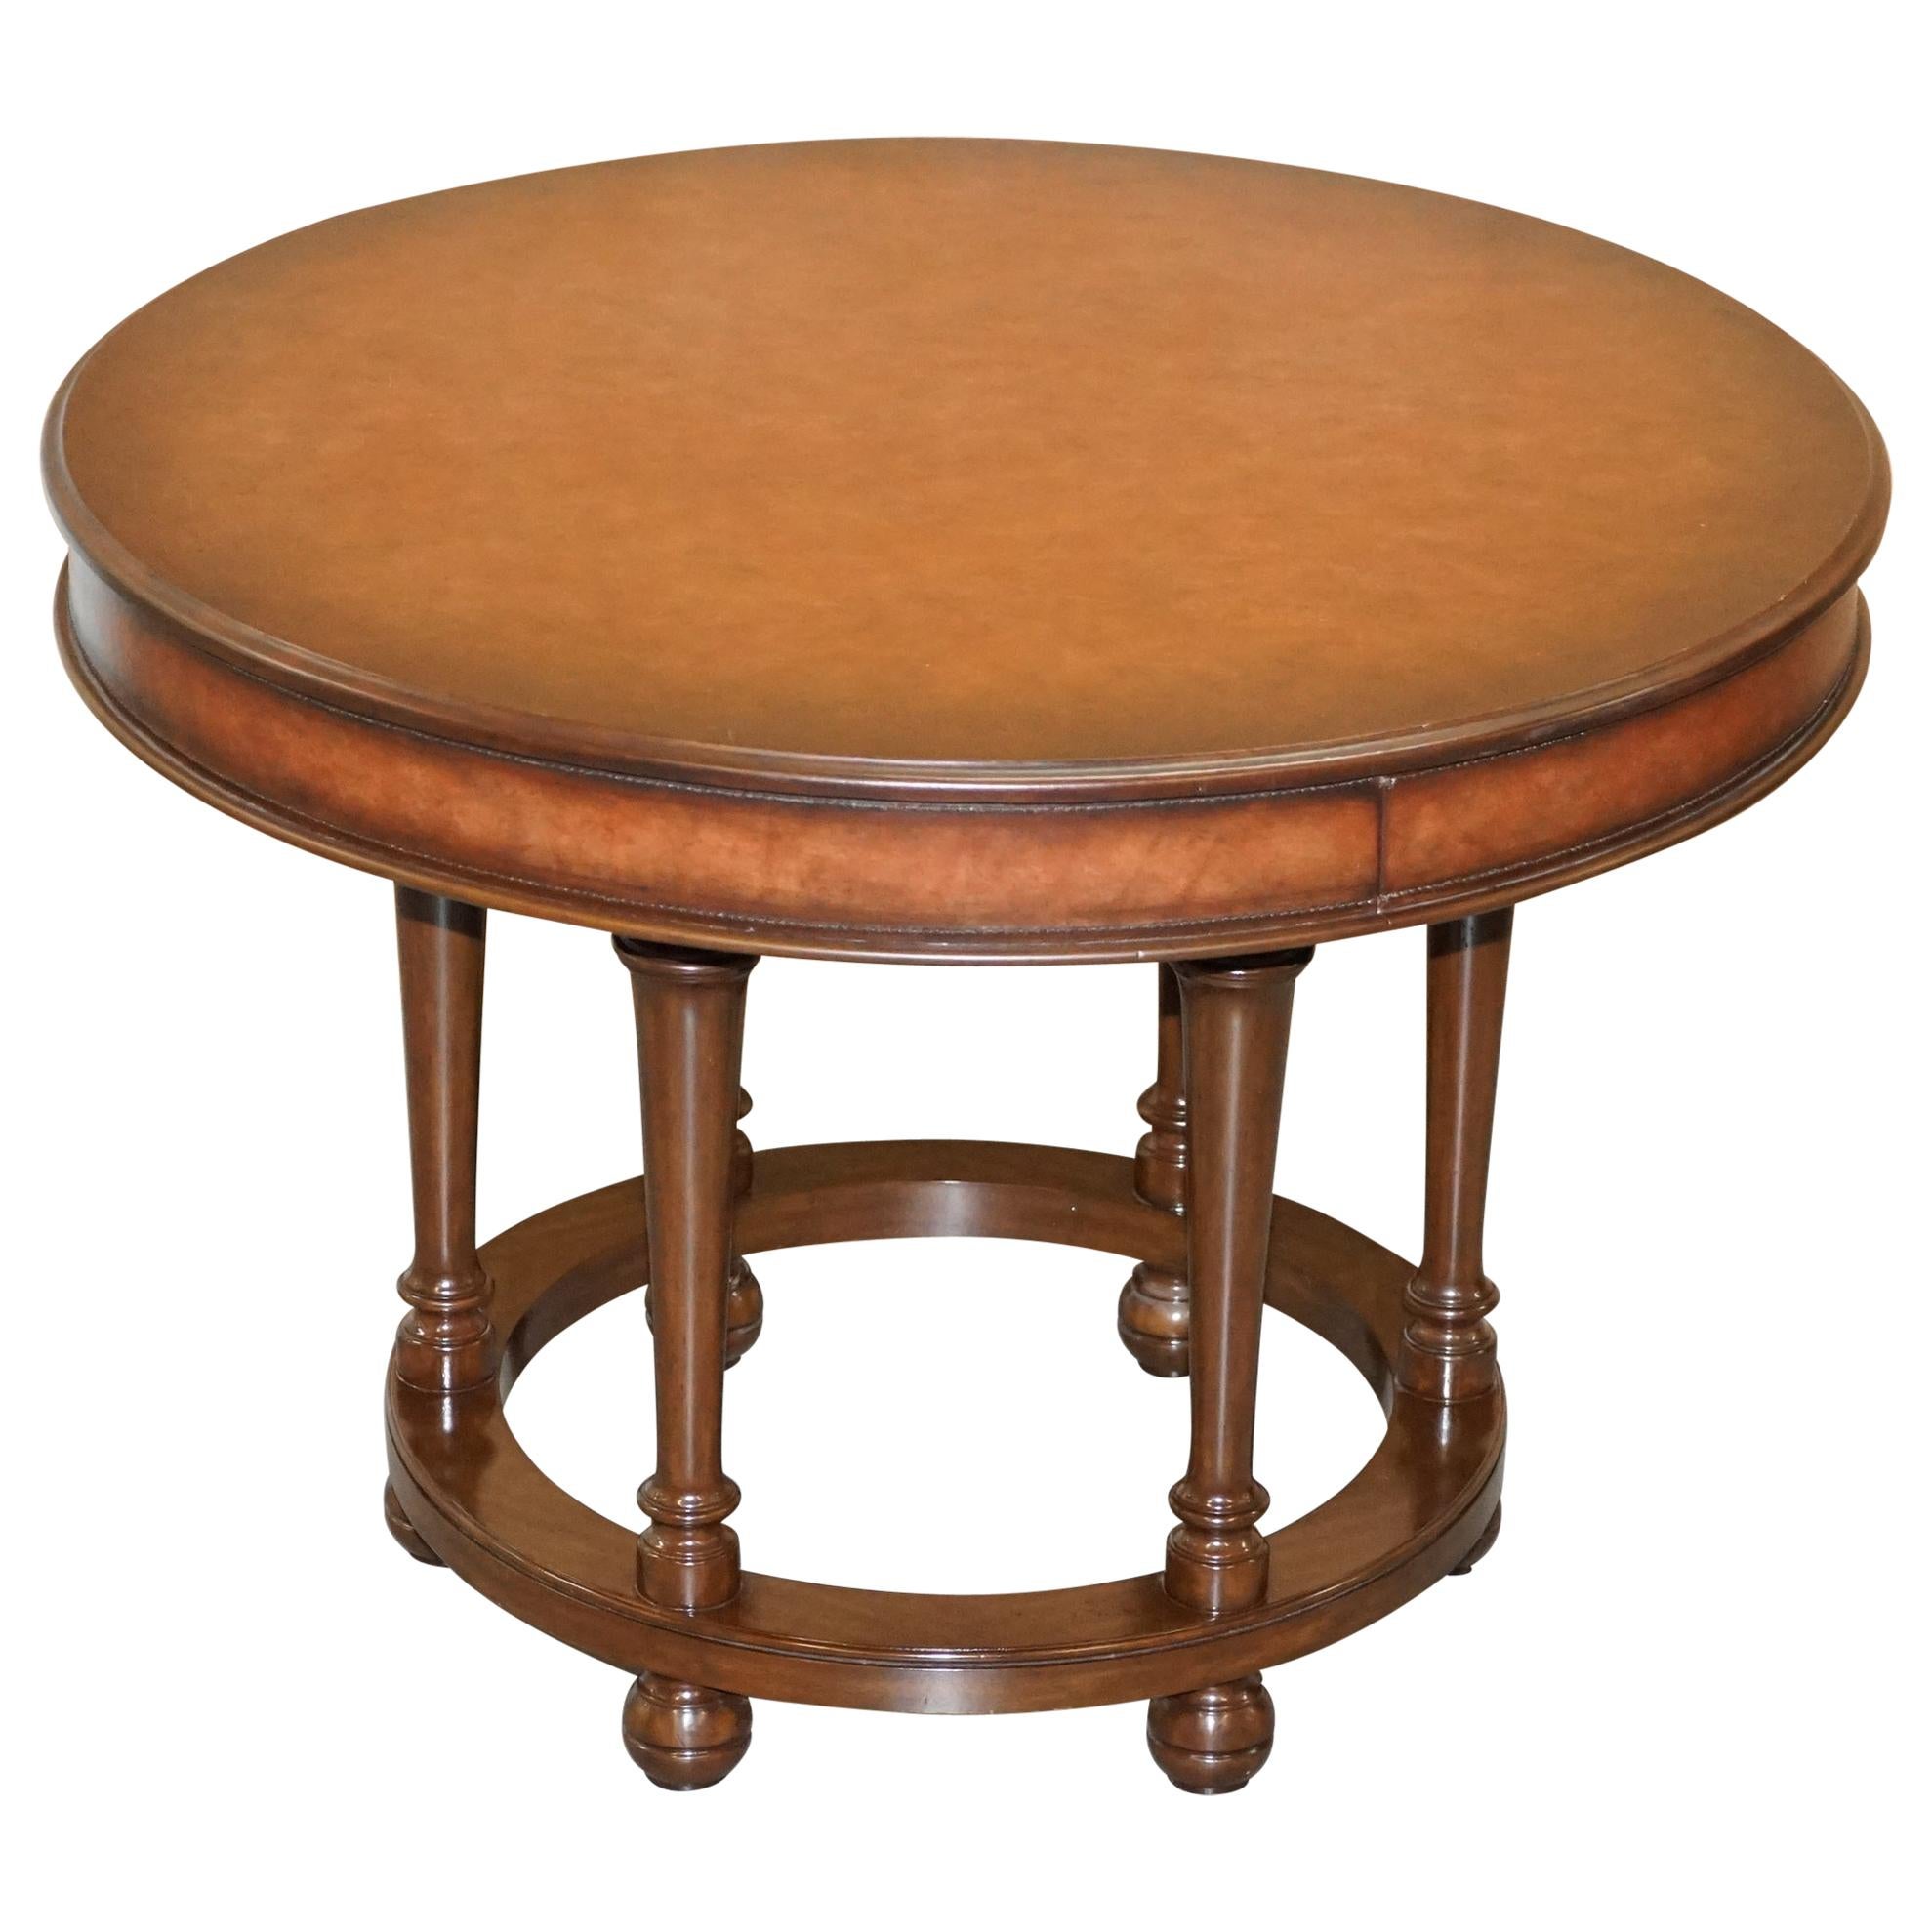 Ralph Lauren Centre Occasional Center Small Dining Table Brown Leather Stitched For Sale